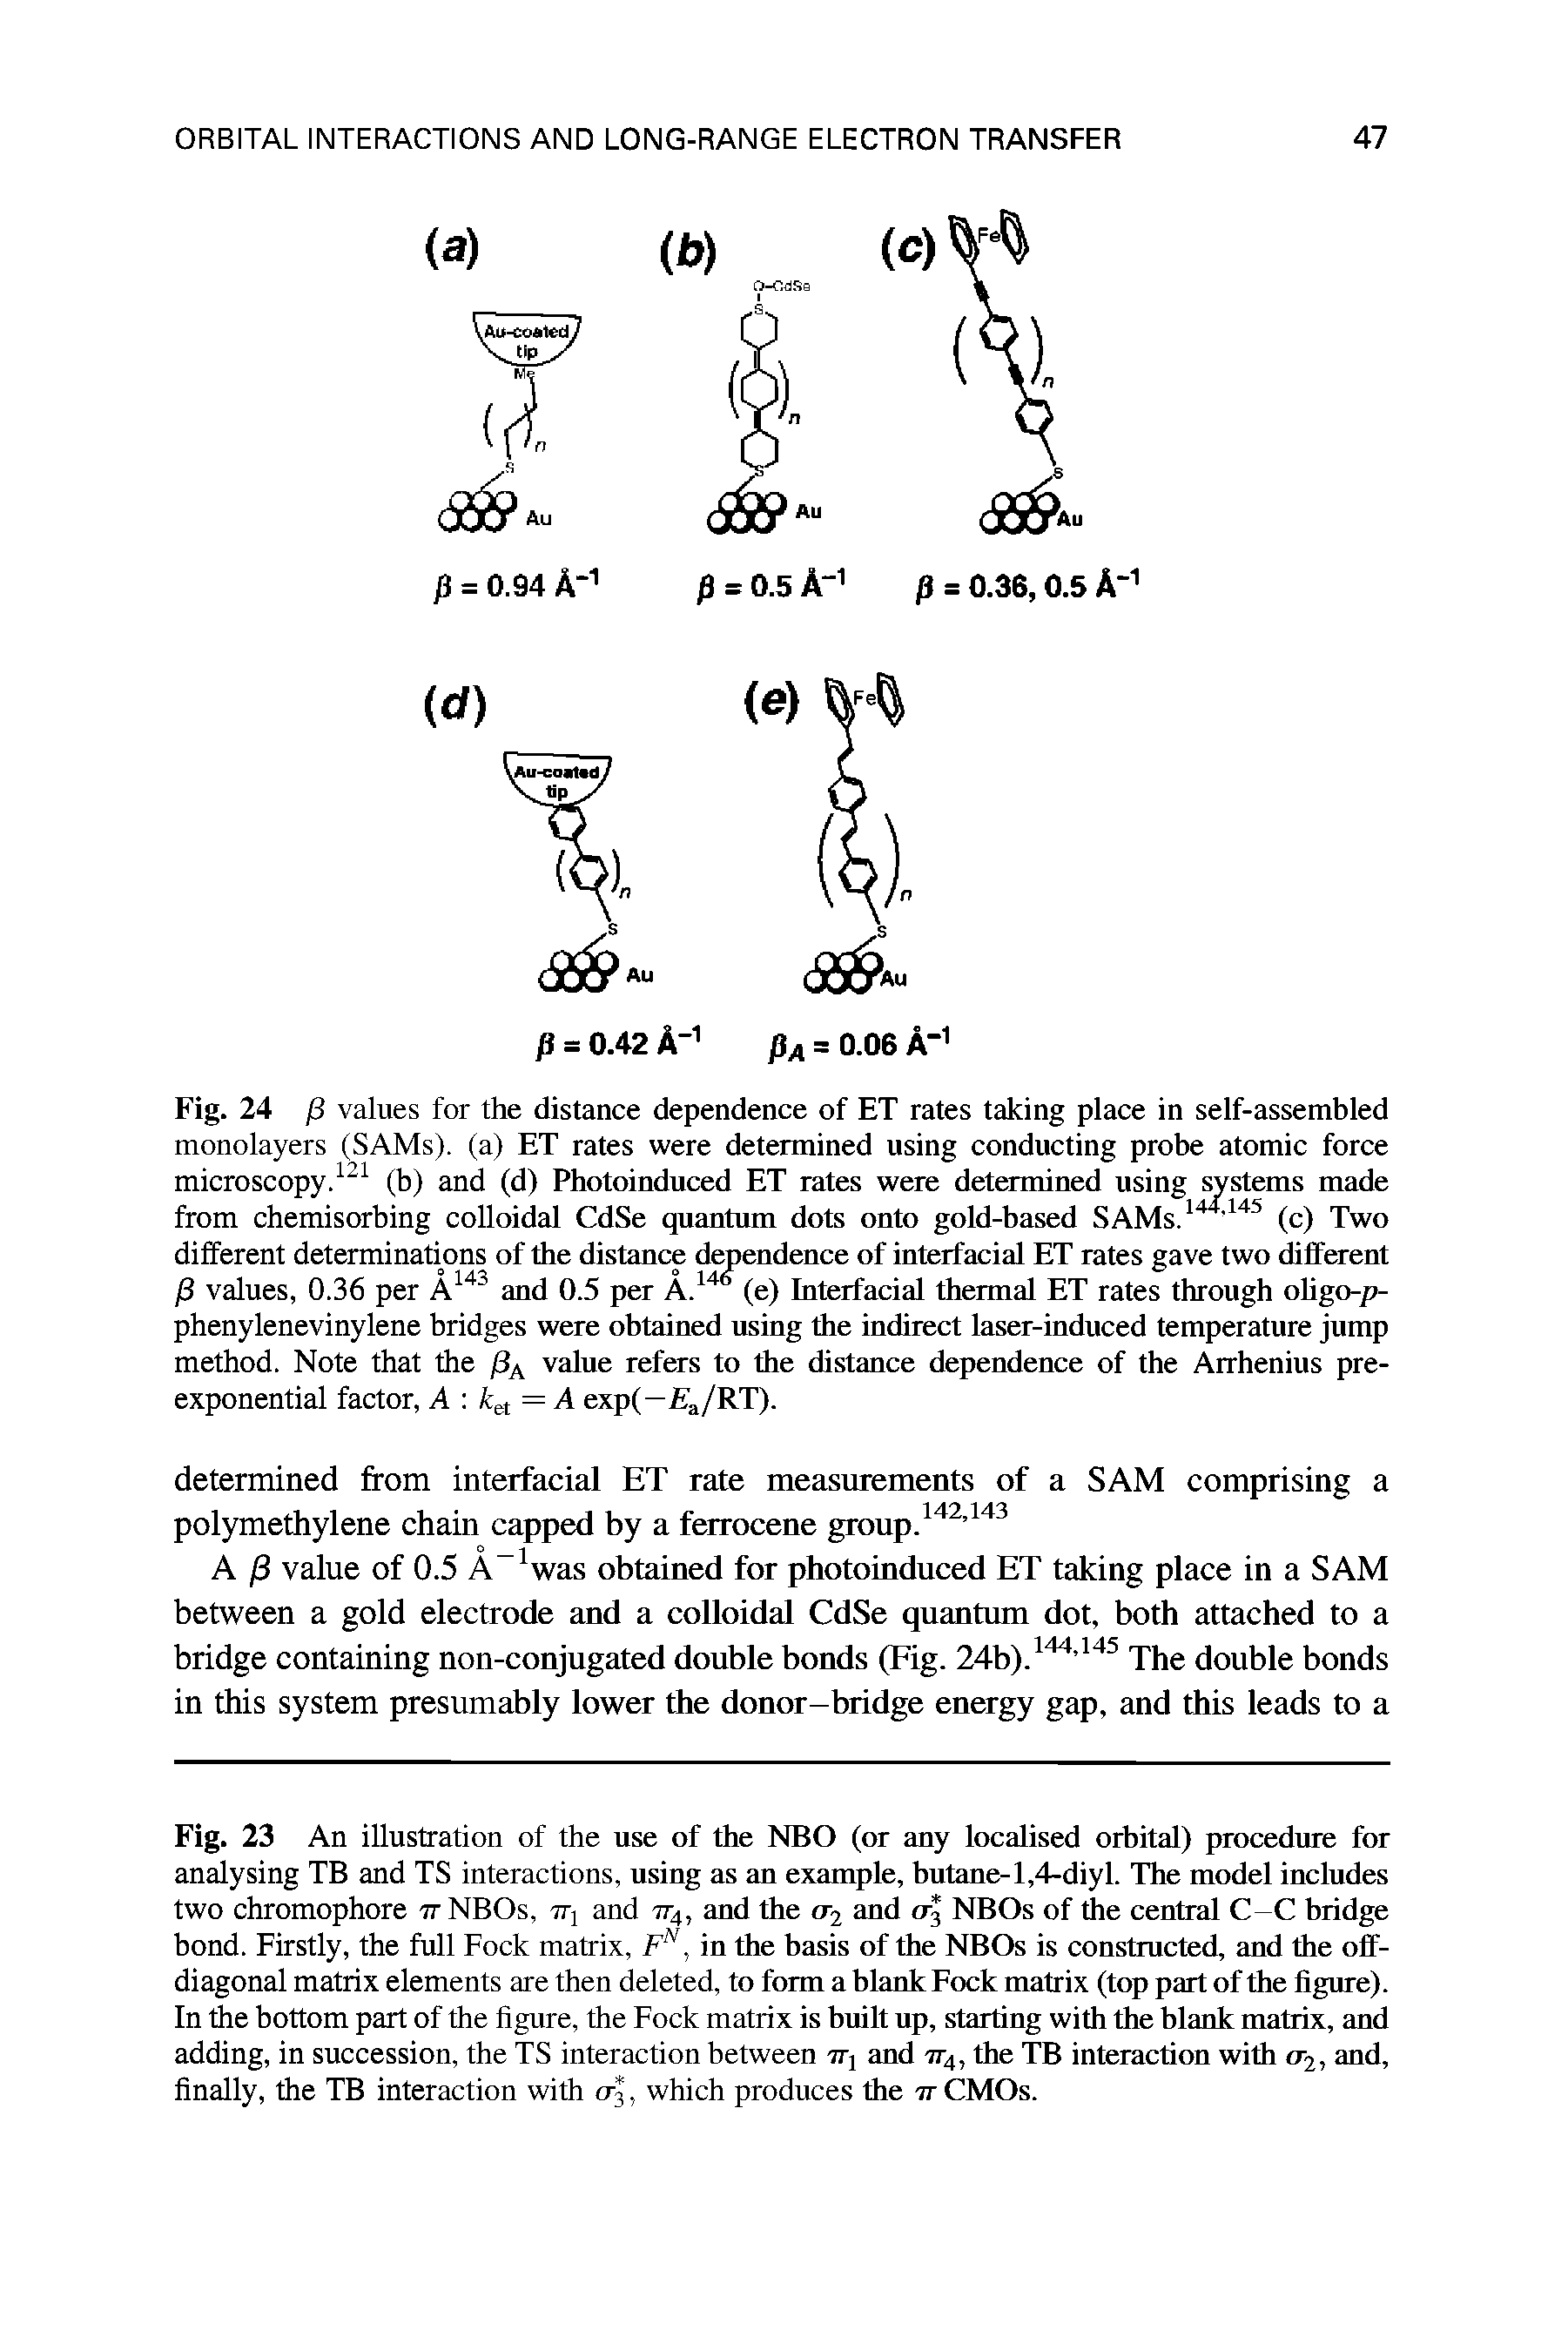 Fig. 23 An illustration of the use of the NBO (or any localised orbital) procedure for analysing TB and TS interactions, using as an example, butane-1,4-diyl. The model includes two chromophore tt NBOs, tti and tt4, and the tr2 and 03 NBOs of the central C—C bridge bond. Firstly, the full Fock matrix, FN, in the basis of the NBOs is constructed, and the off-diagonal matrix elements are then deleted, to form a blank Fock matrix (top part of the figure). In the bottom part of the hgure, the Fock matrix is built up, starting with the blank matrix, and adding, in succession, the TS interaction between 7T and 7r4, the TB interaction with <t2, and, finally, the TB interaction with crl, which produces the it CMOs.